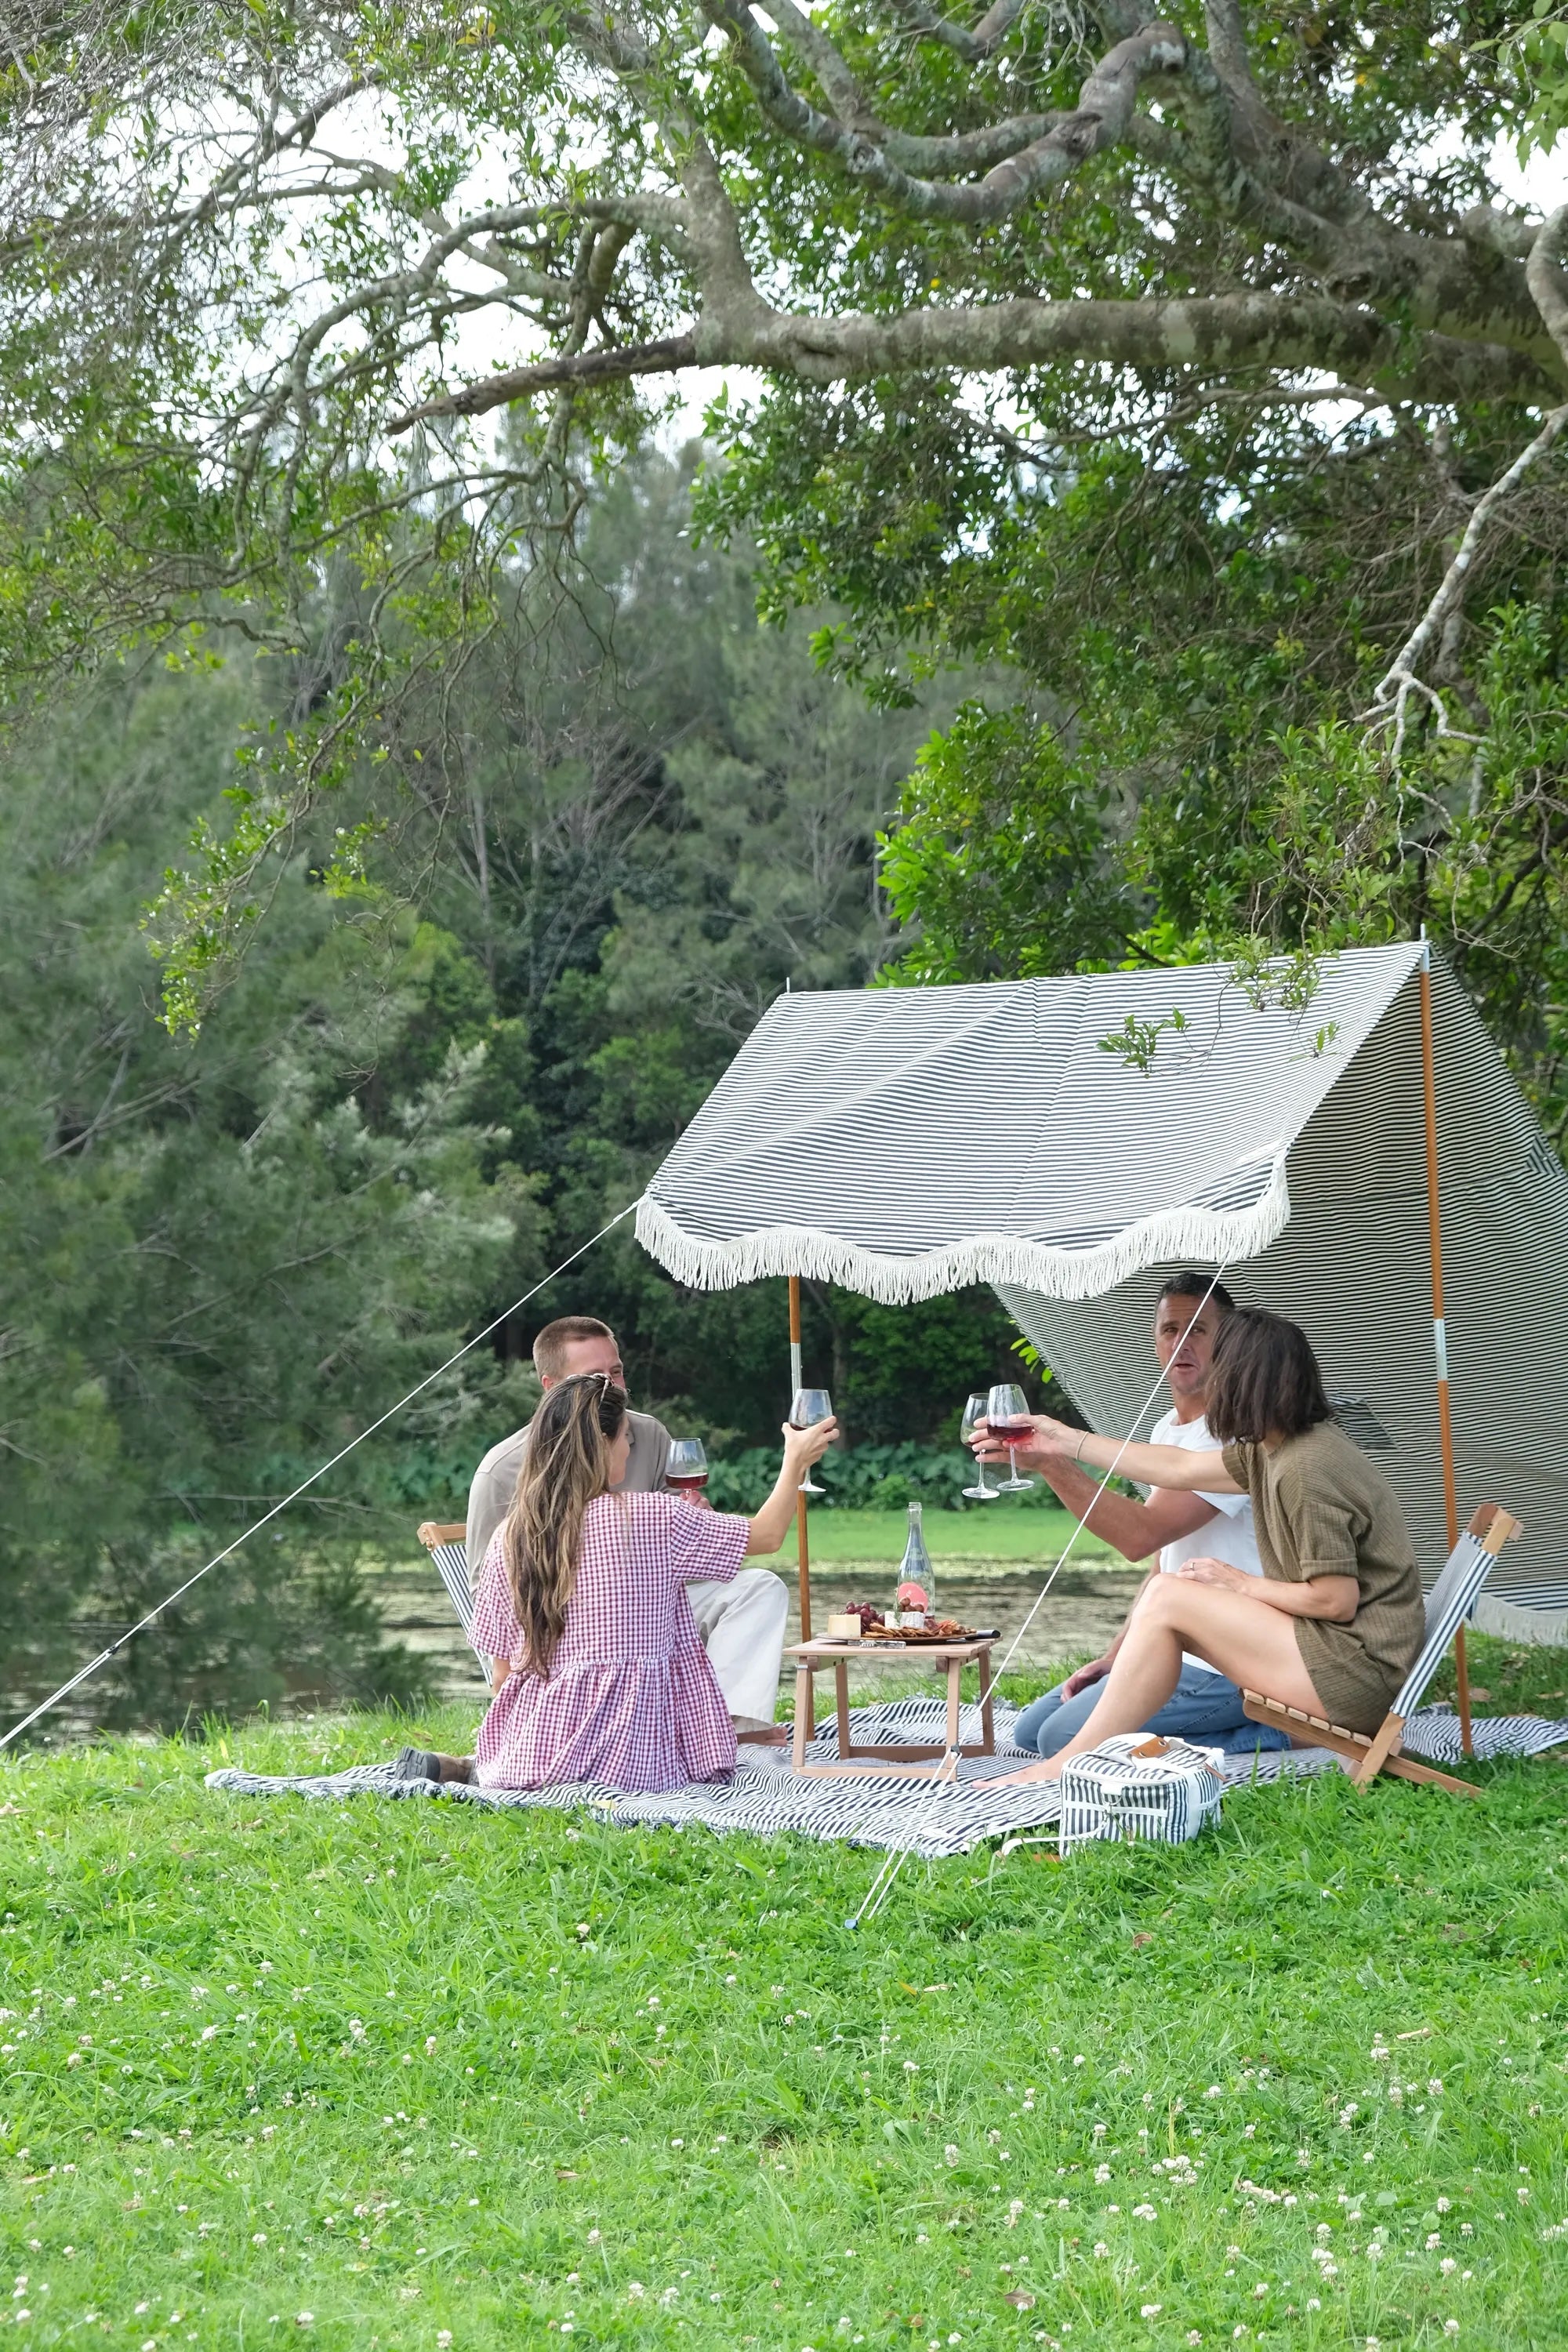 picnic setup with friends under a tent on the grass